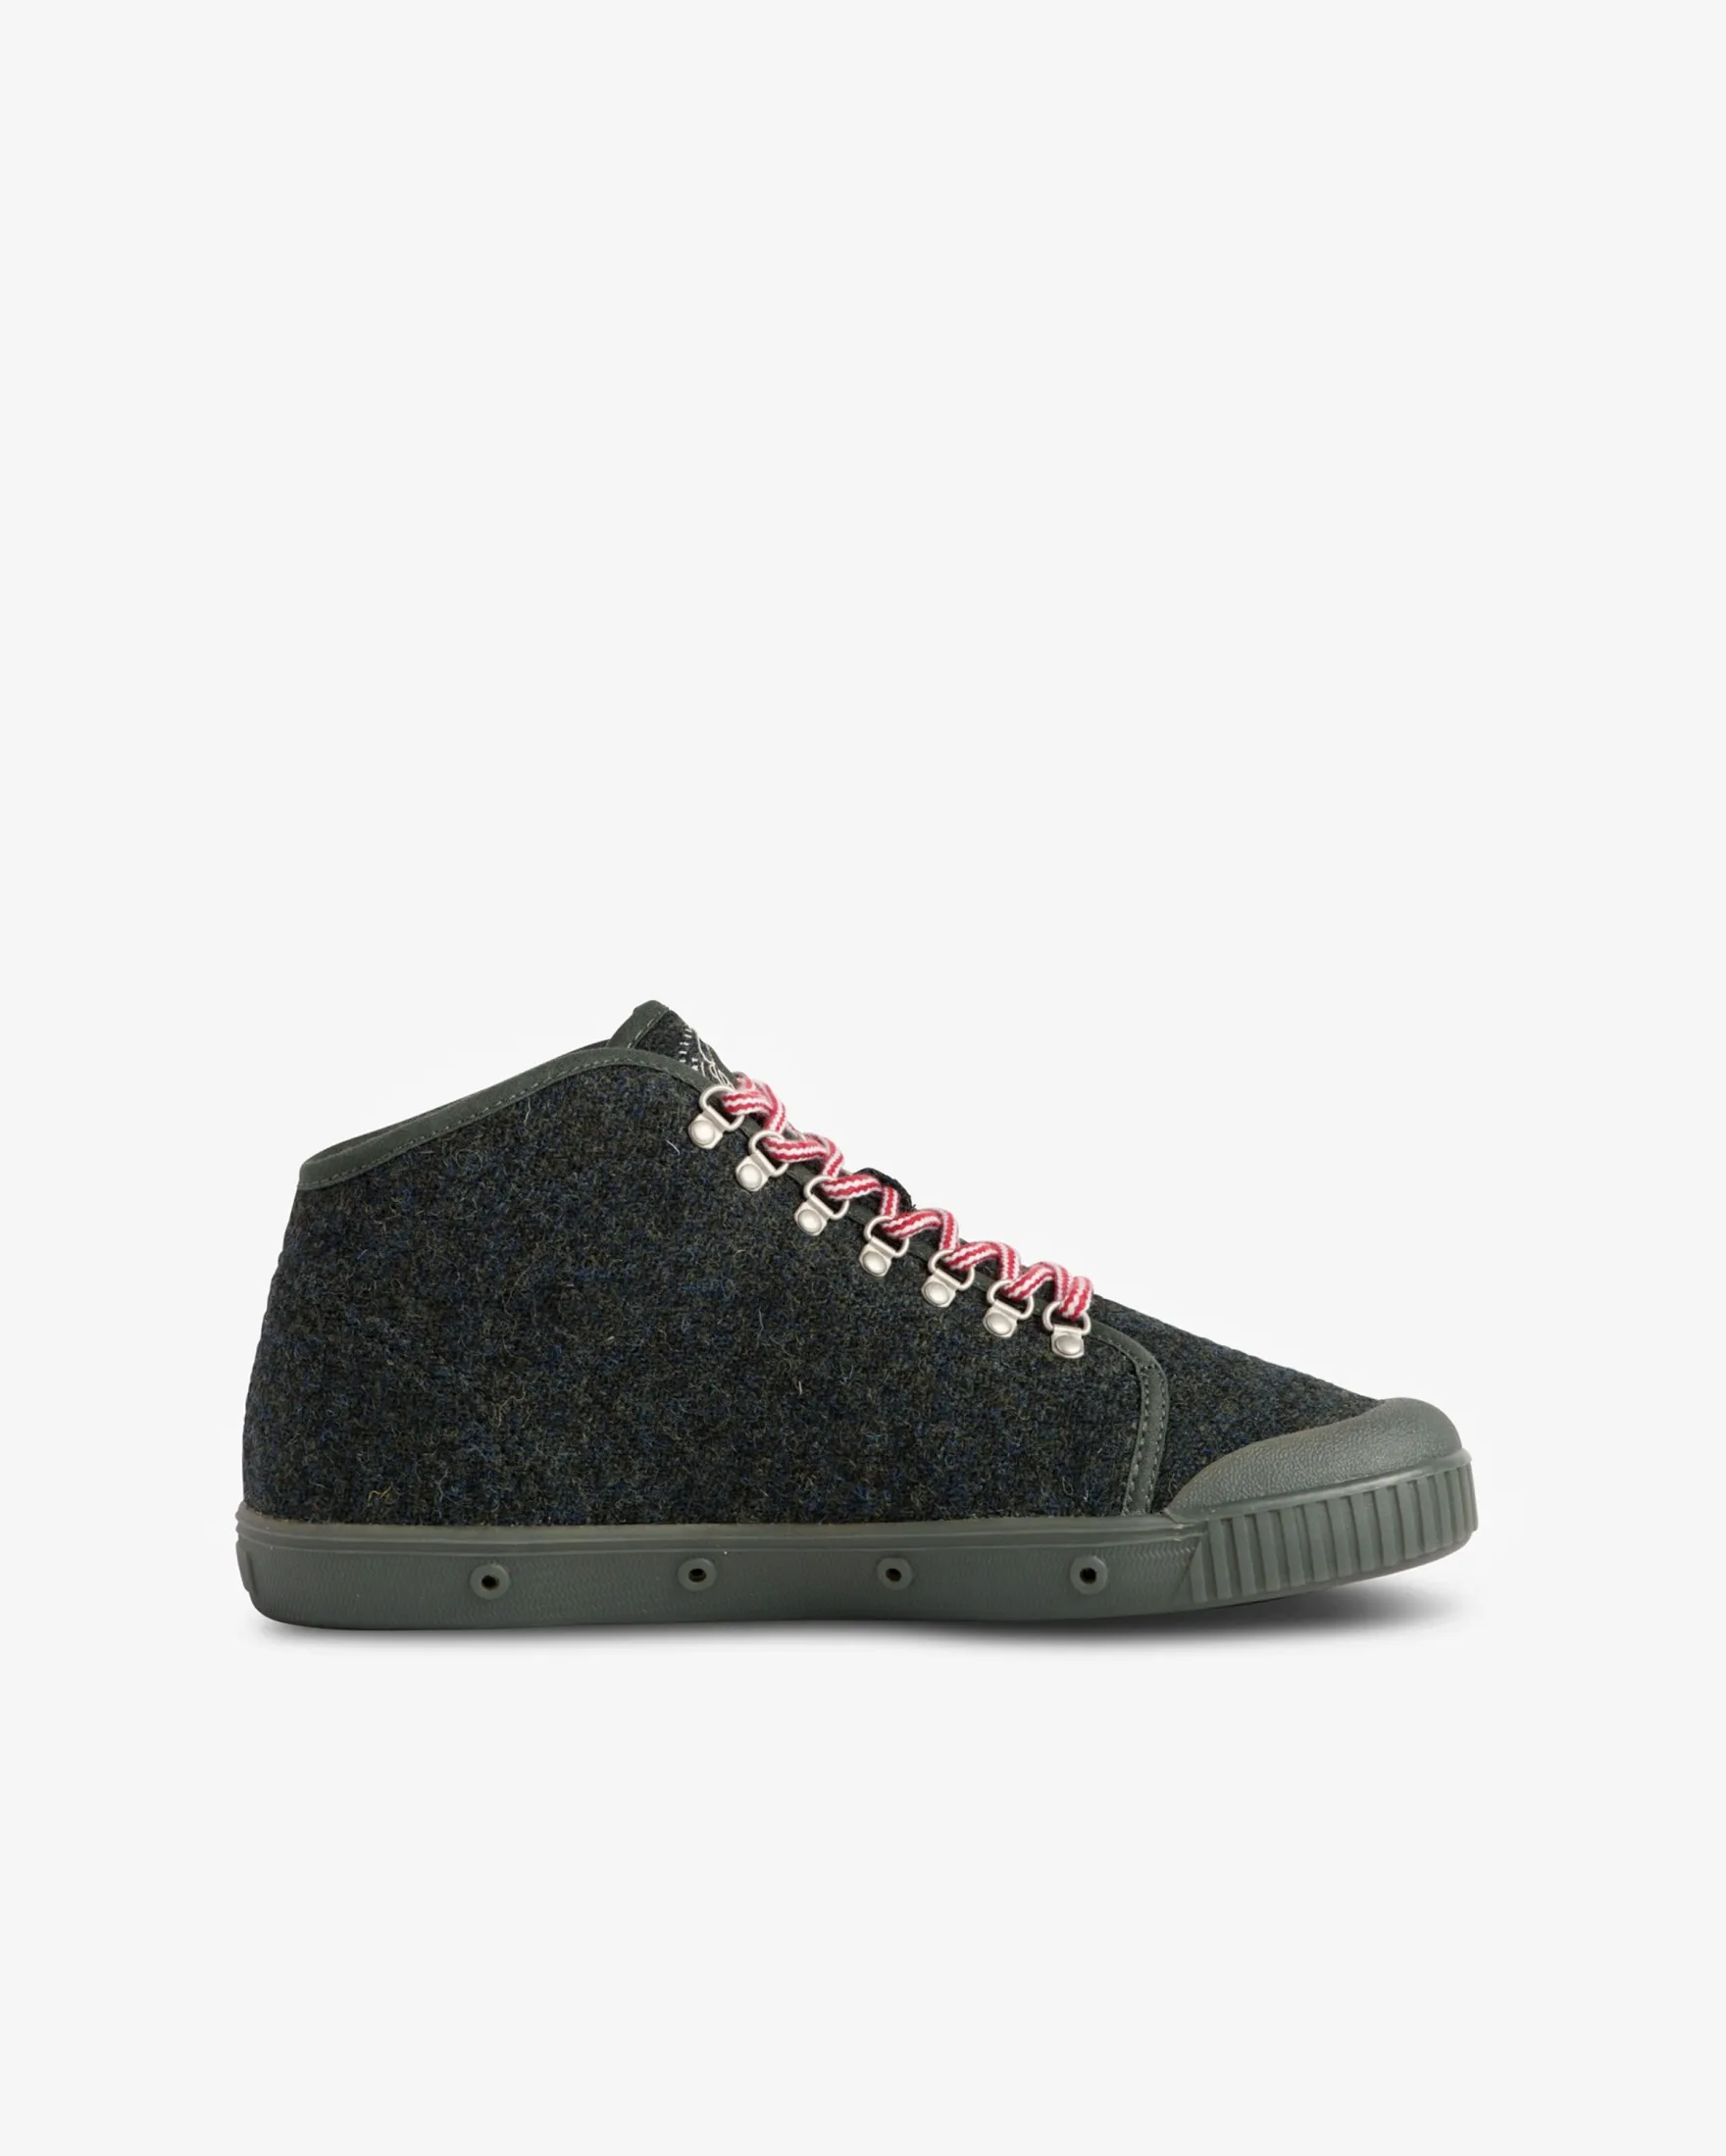 Unisex high top trainer limited edition